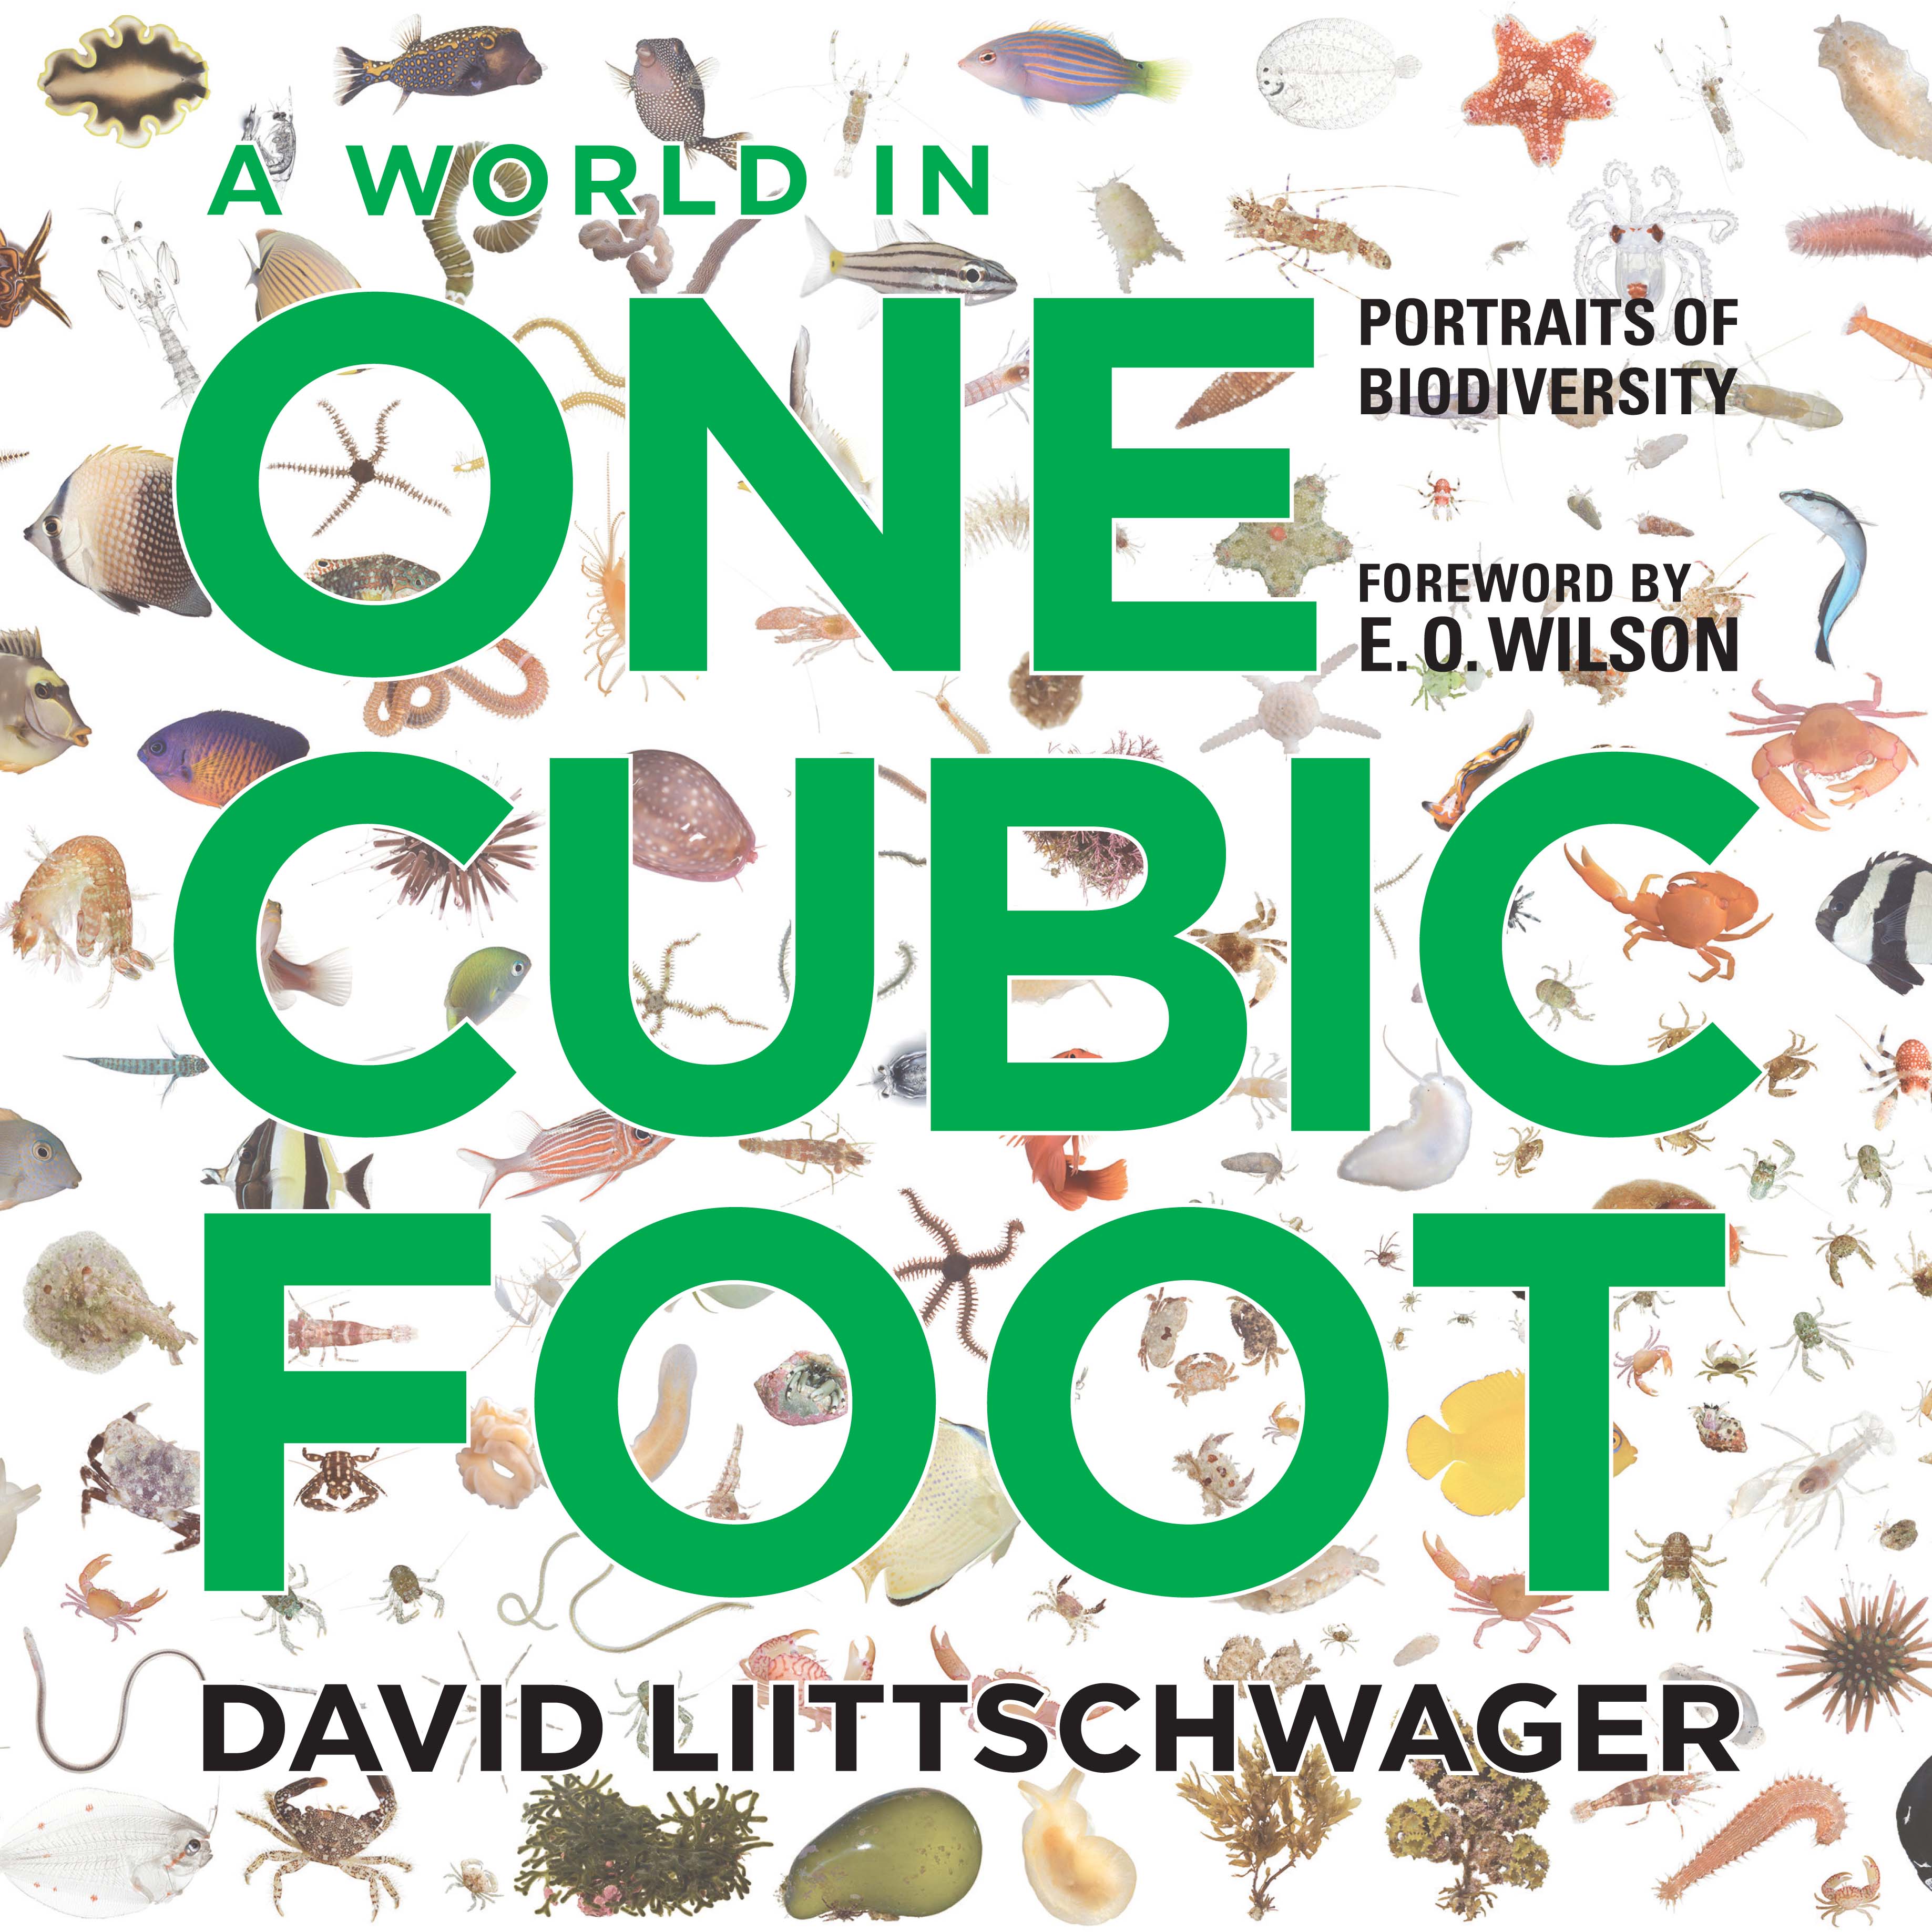 A World in One Cubic Foot: Portraits of Biodiversity W. S. Di Piero, Alan Huffman, August Kleinzahler and Elizabeth Kolbert